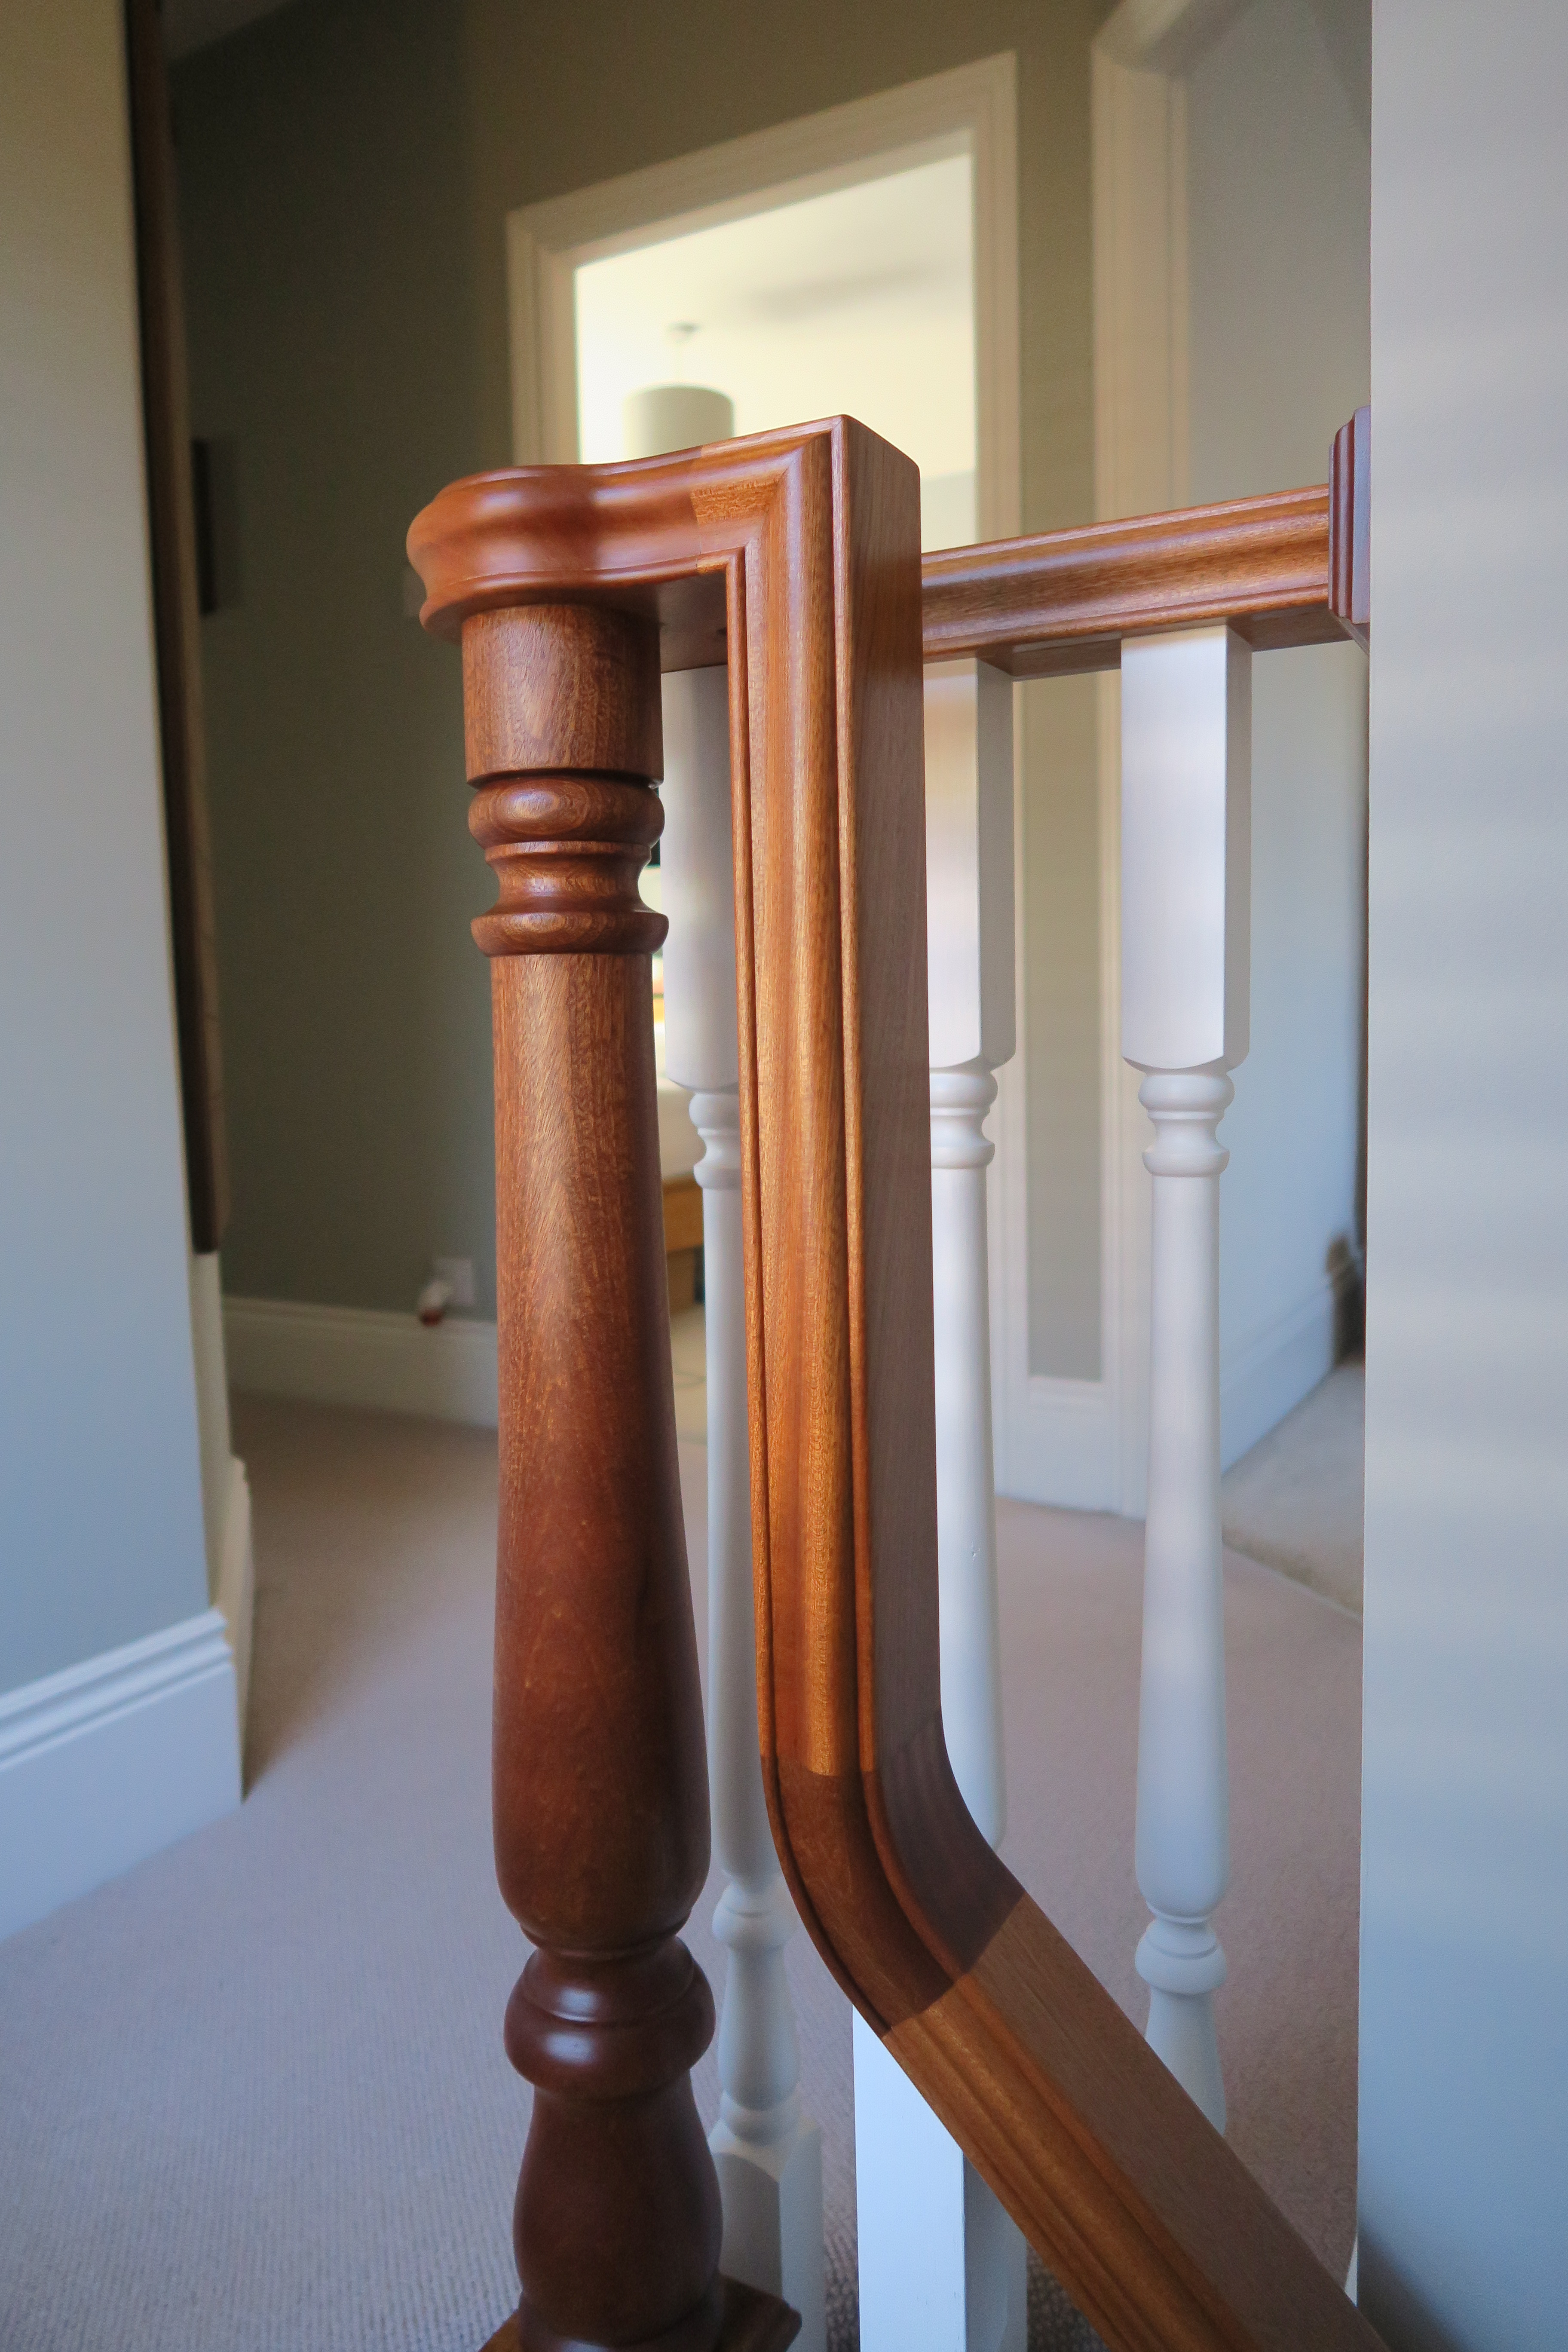 sapele/painted spindles